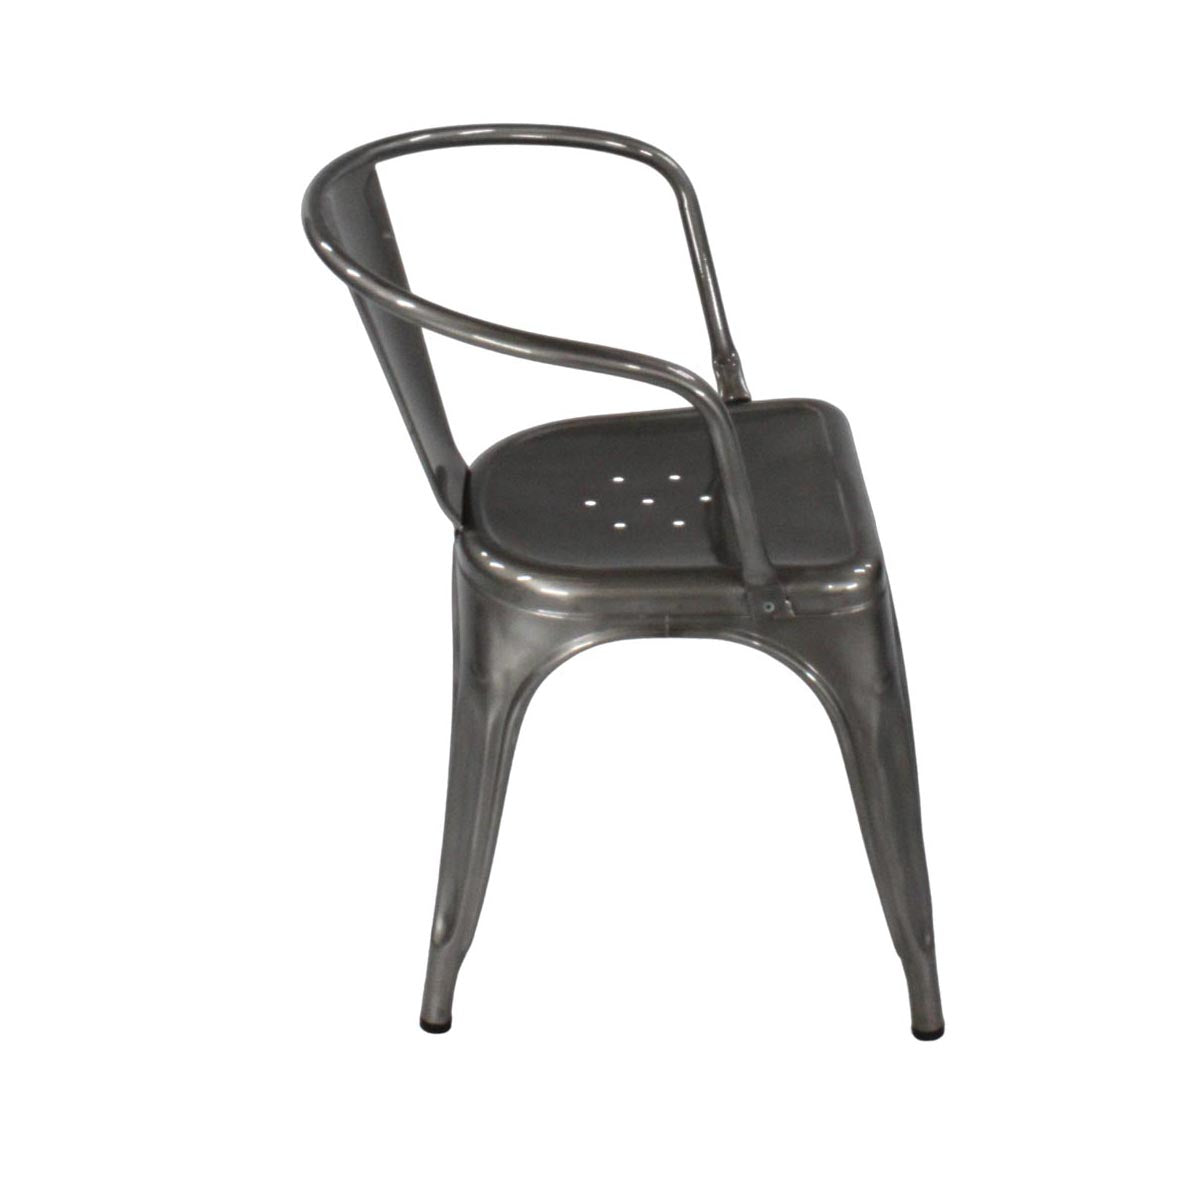 Tolix: Chaise A Cafe Chair in Gunmetal Grey - Refurbished